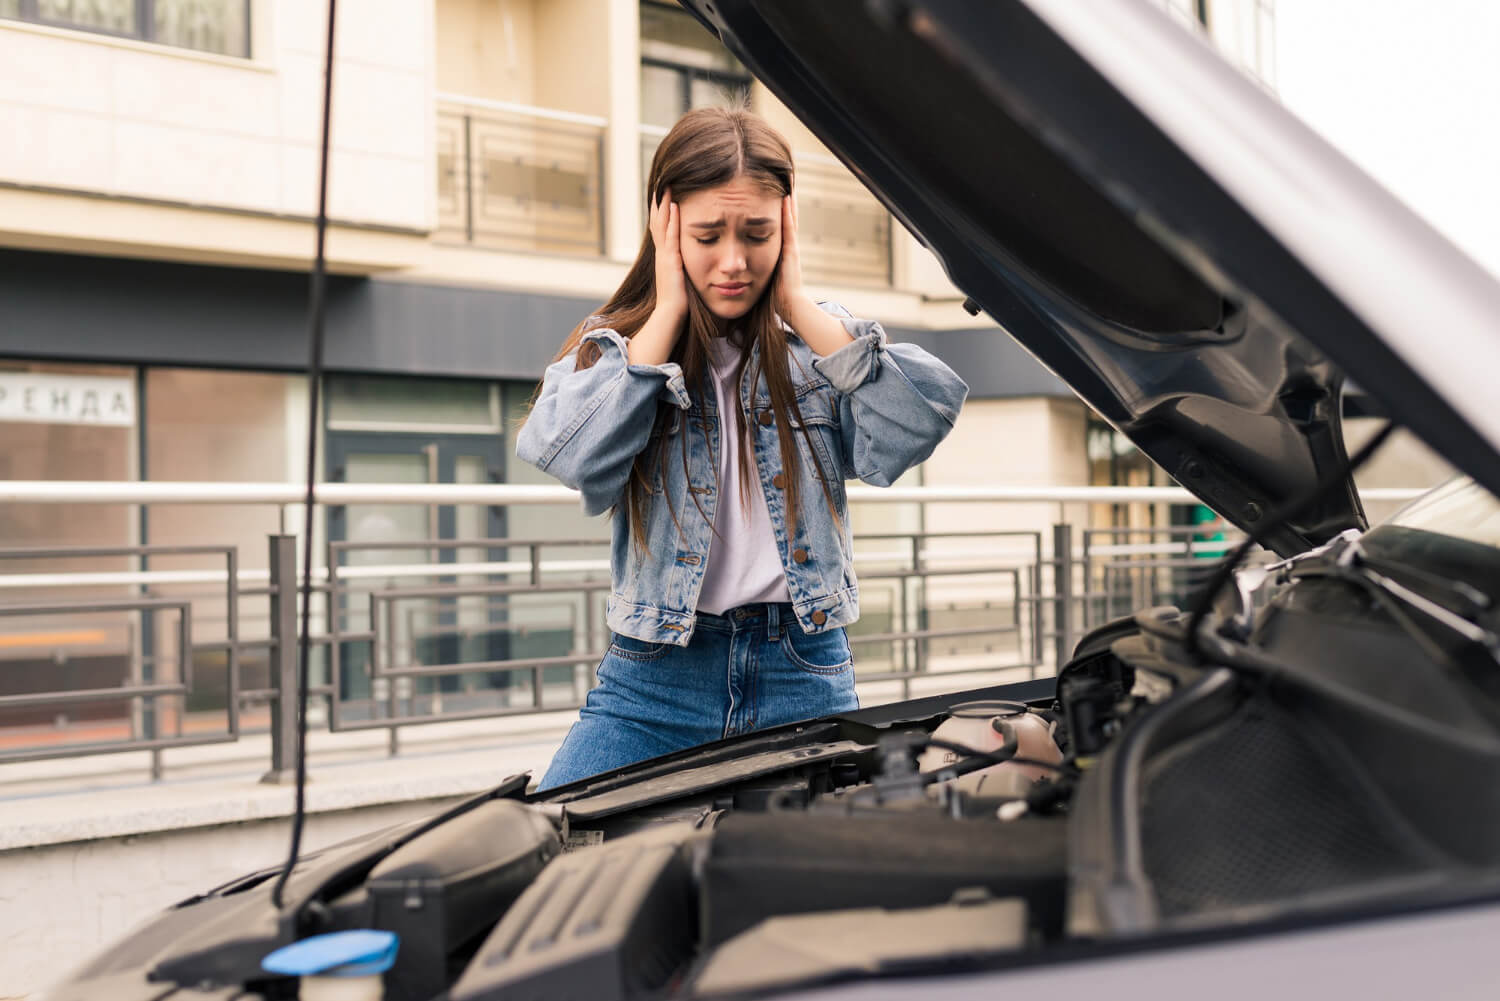  Don’t Stress! Your Car Broke Down: Here’s How to Handle the Situation Like a Pro!